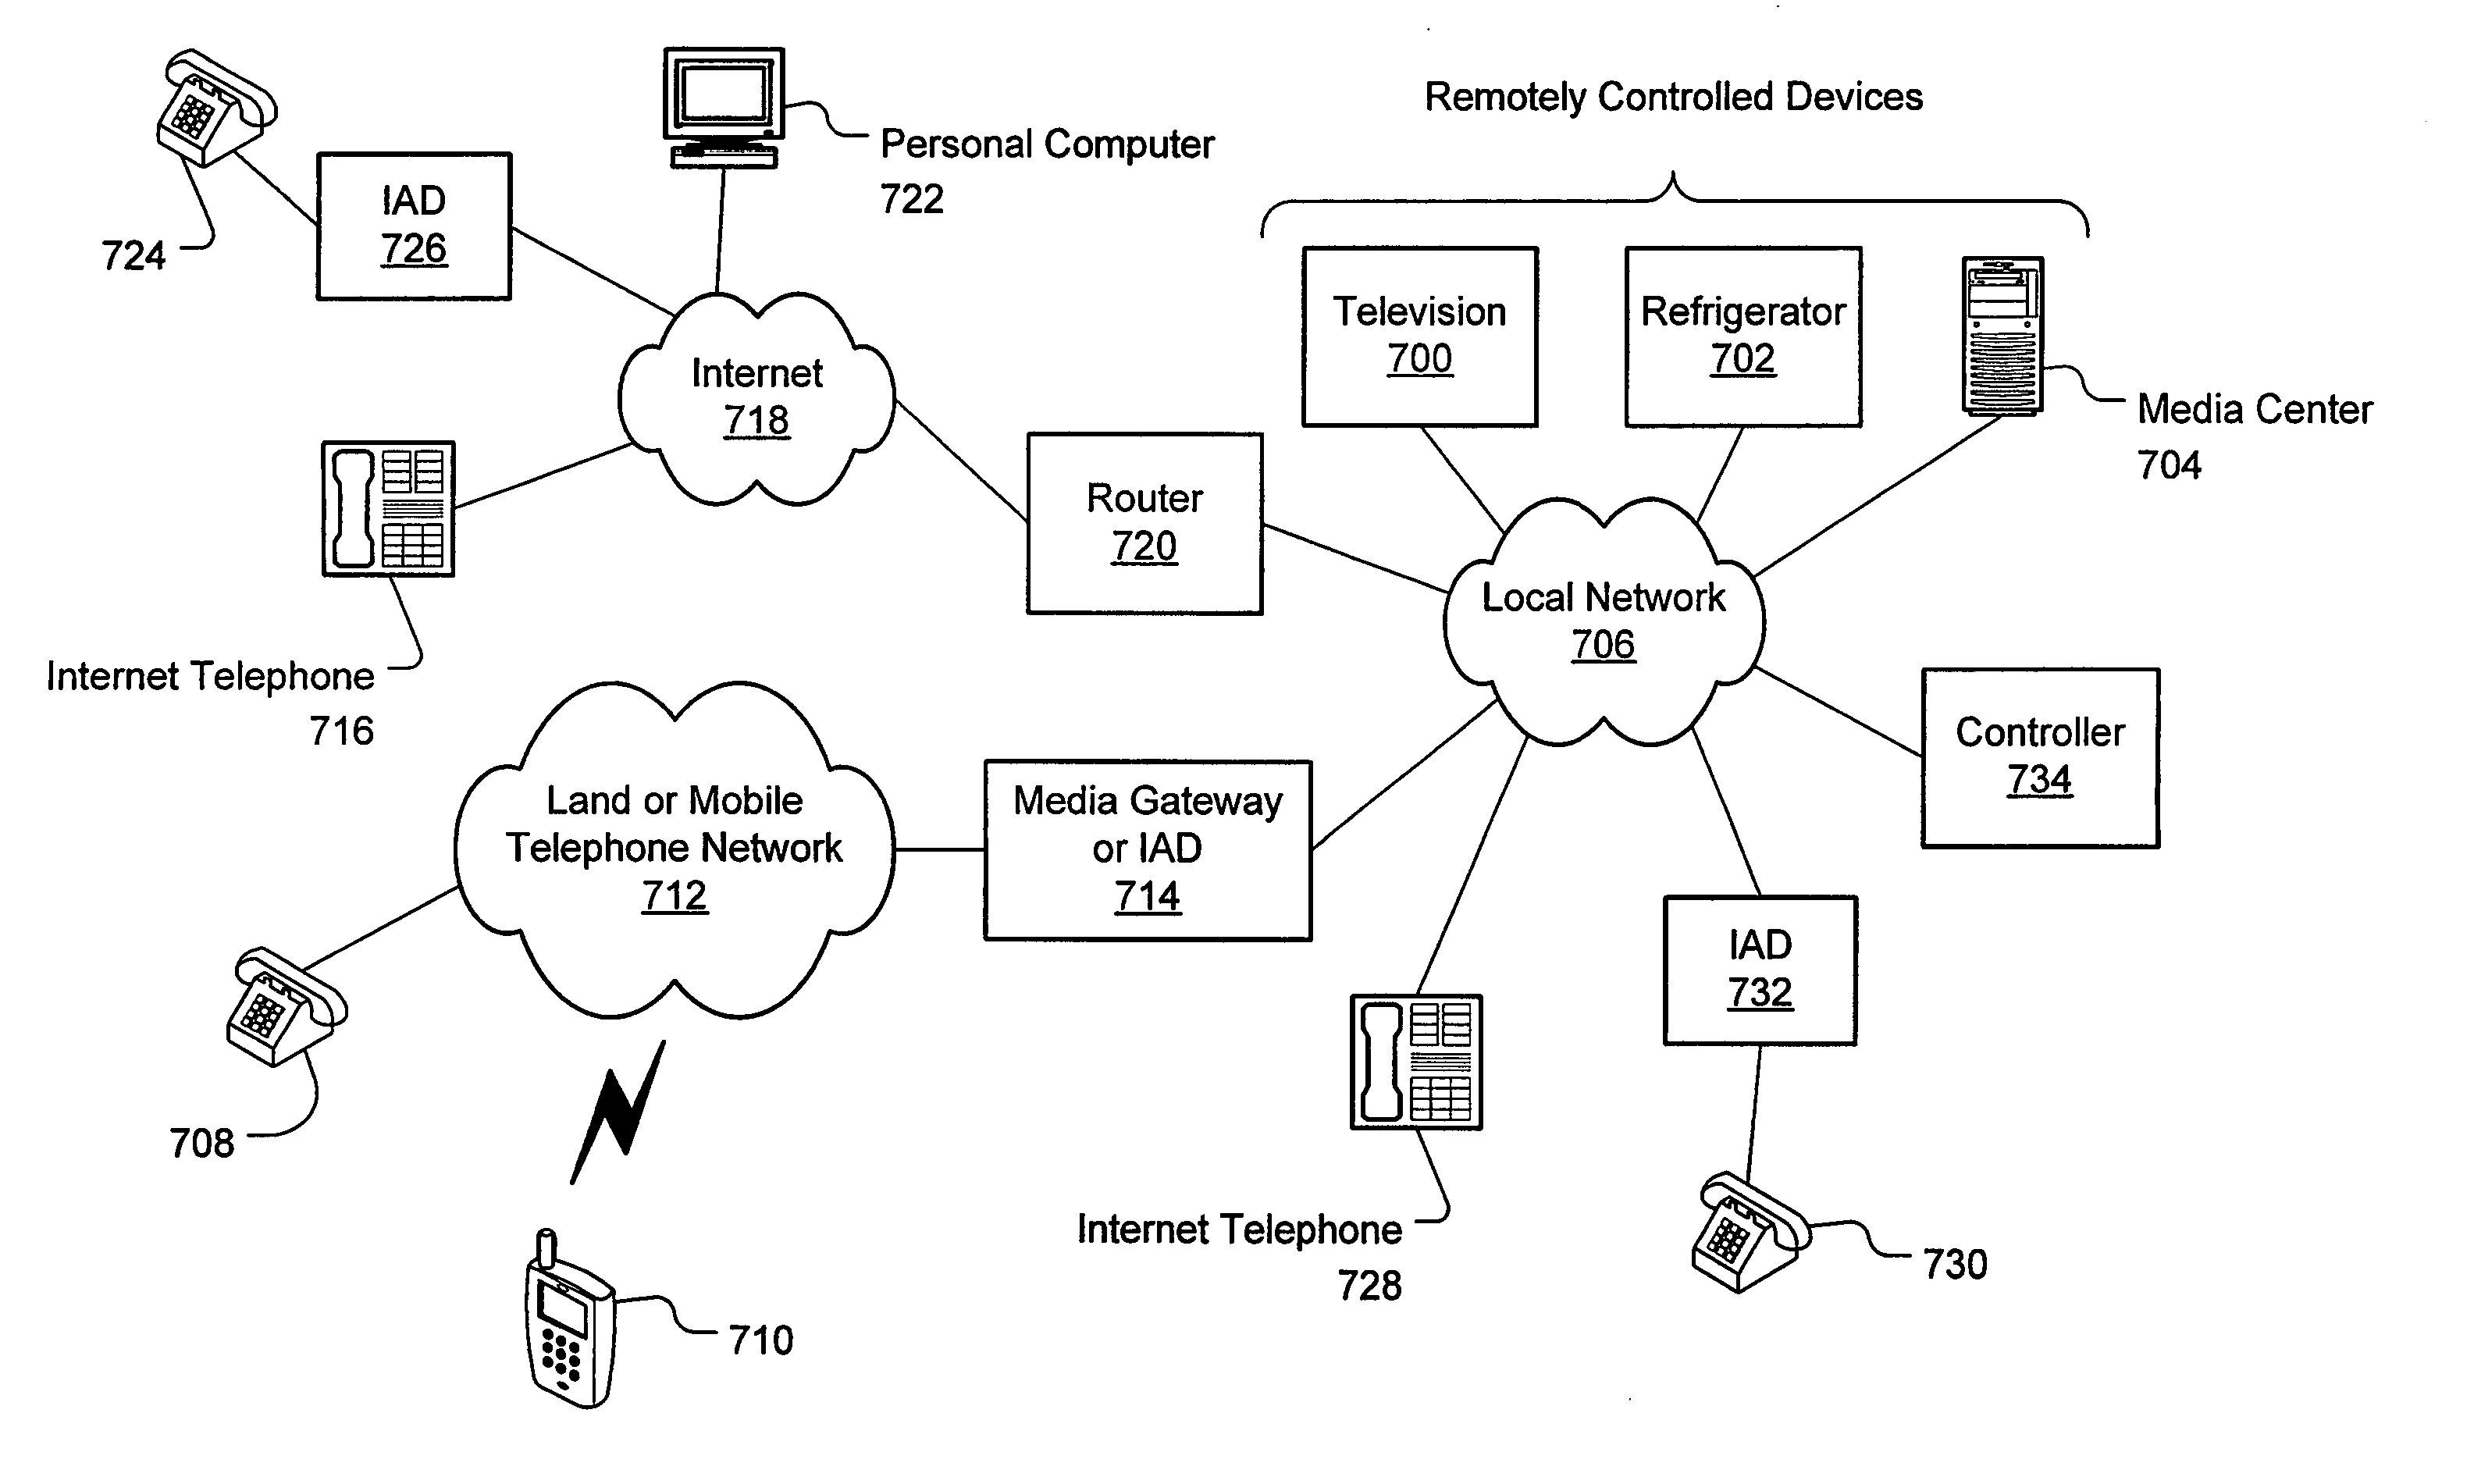 Remote control of device by telephone or other communication devices